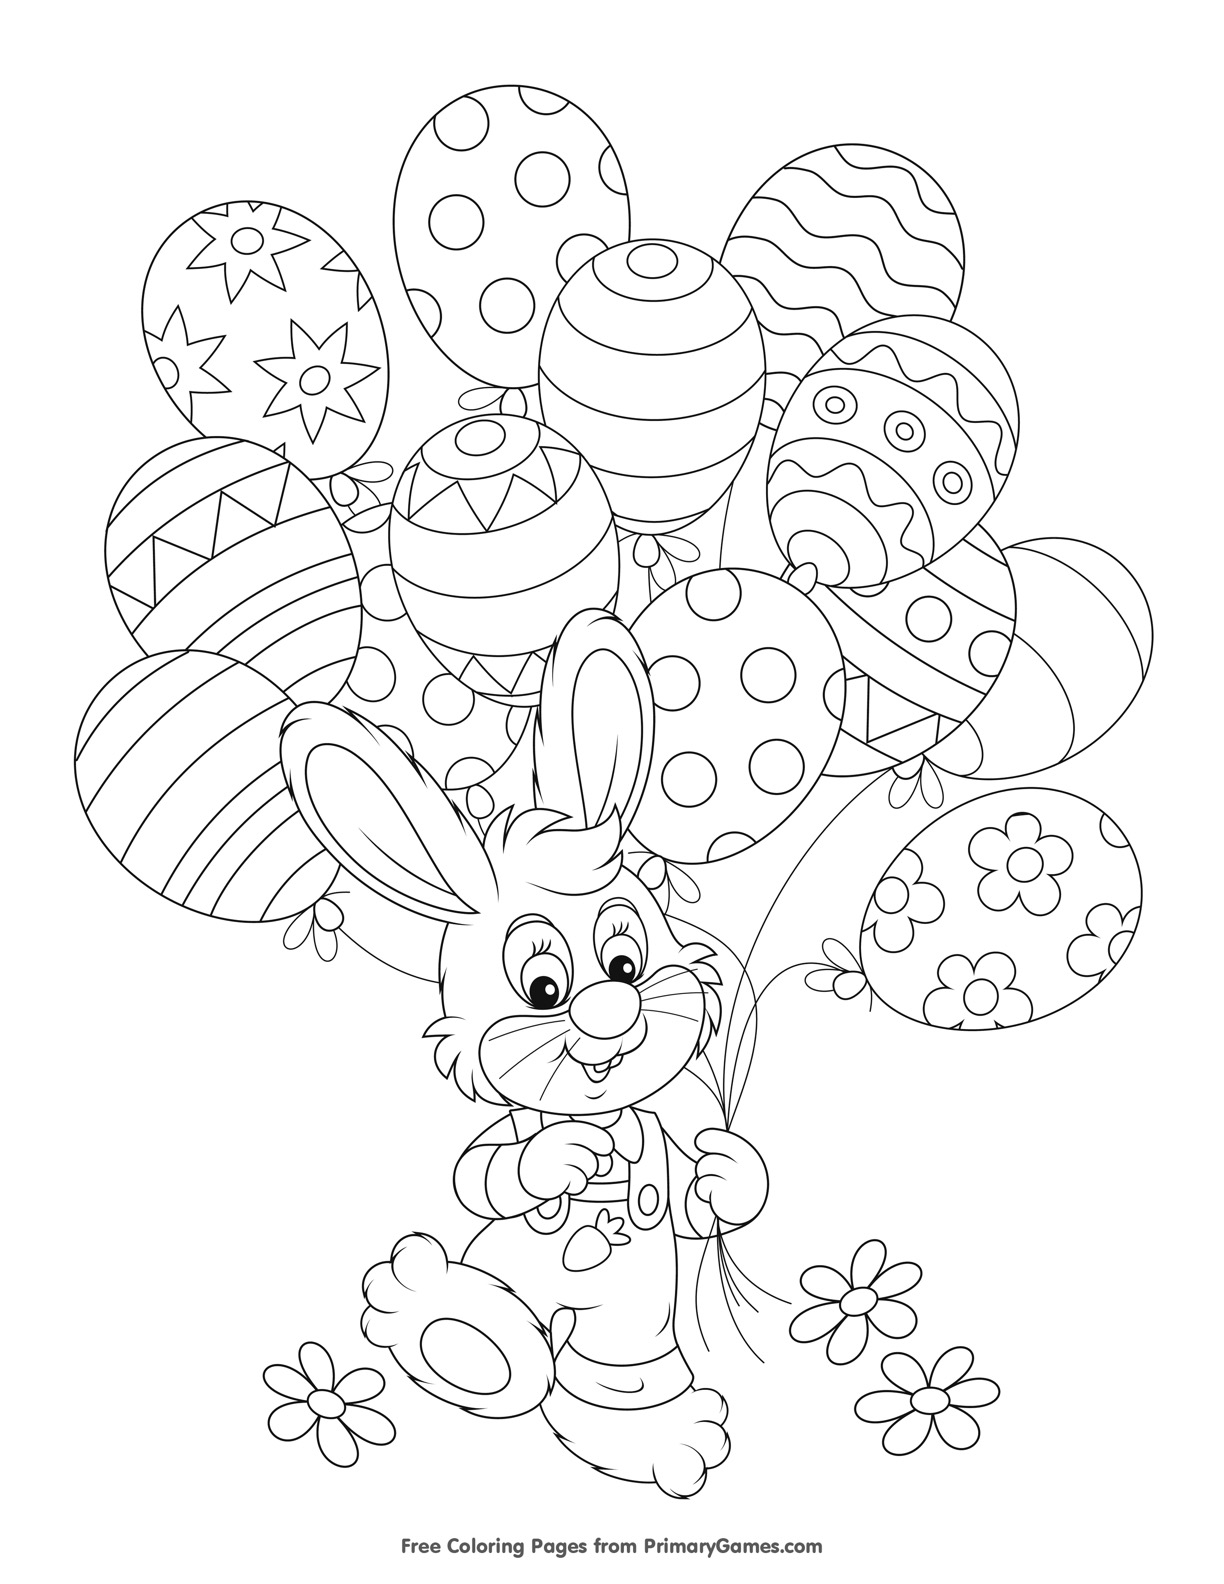 Coloring Activity Book 2 Years Bulk Coloring Books For Girls Fun 4